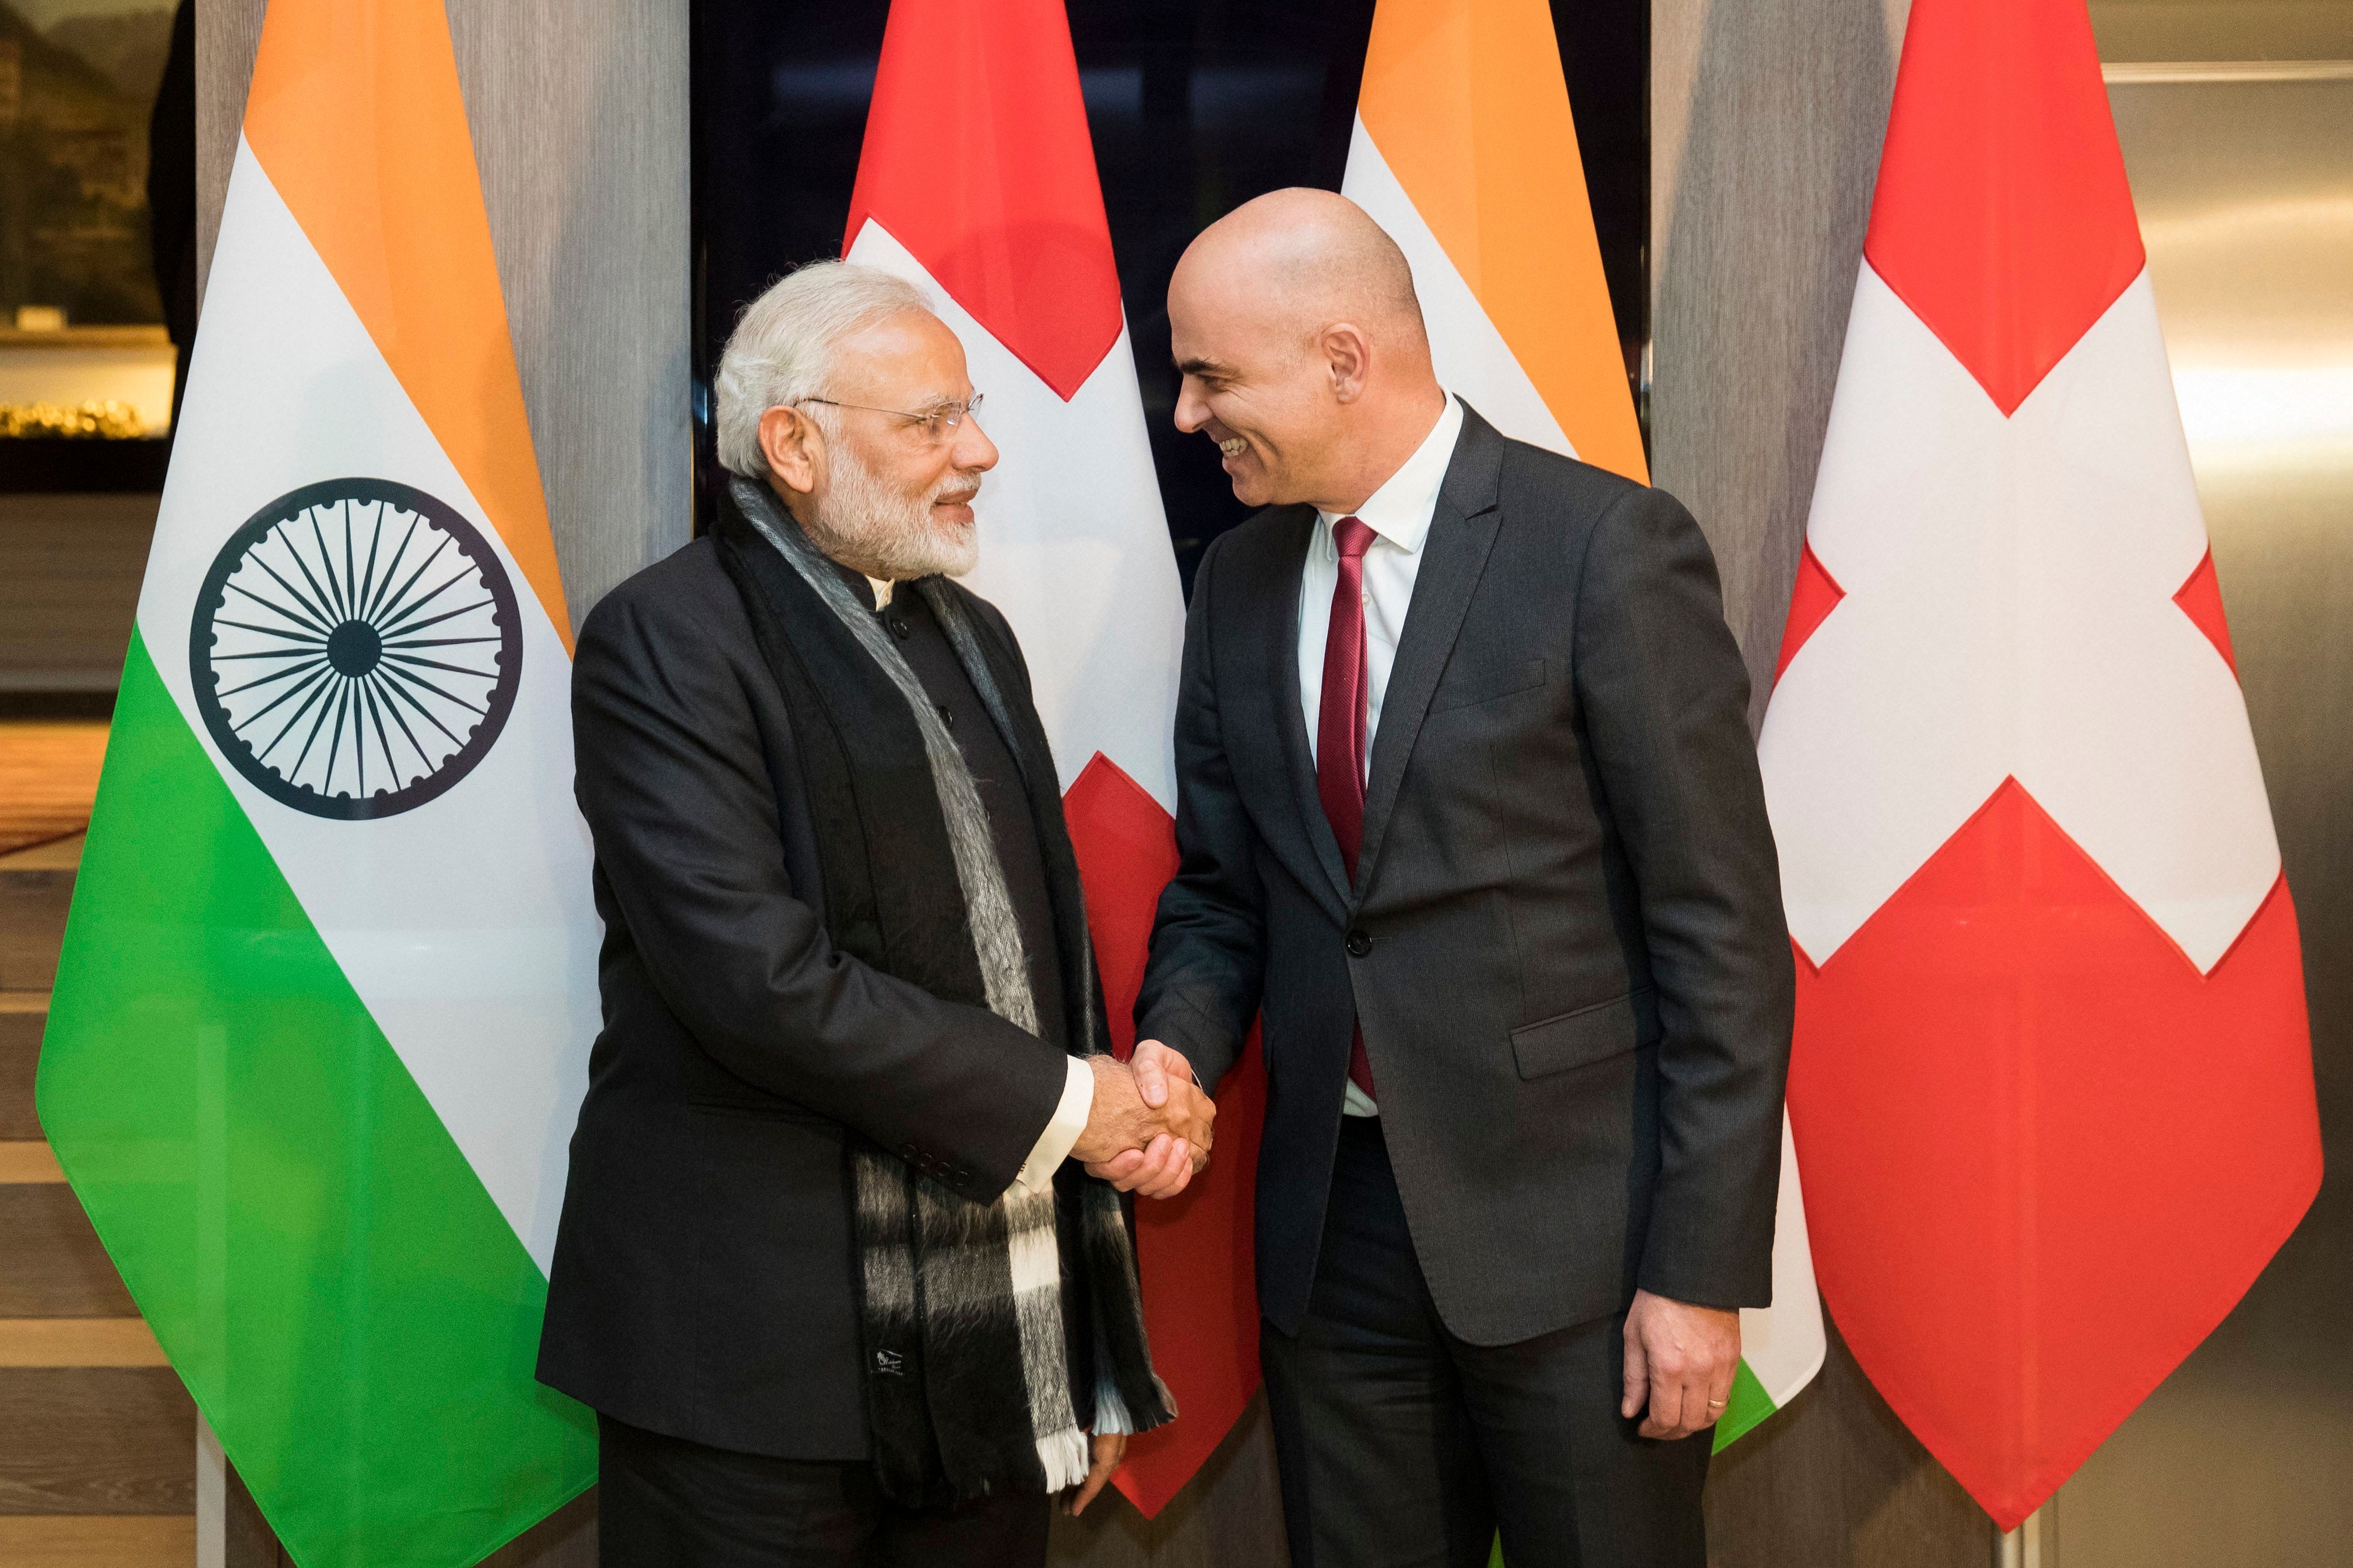 Swiss Federal President Alain Berset, right, and Indian Prime Minister Narendra Modi, shake hands prior to a meeting one day before the start of the 48th annual meeting of the World Economic Forum, WEF, in Davos, Switzerland. (AP Photo)